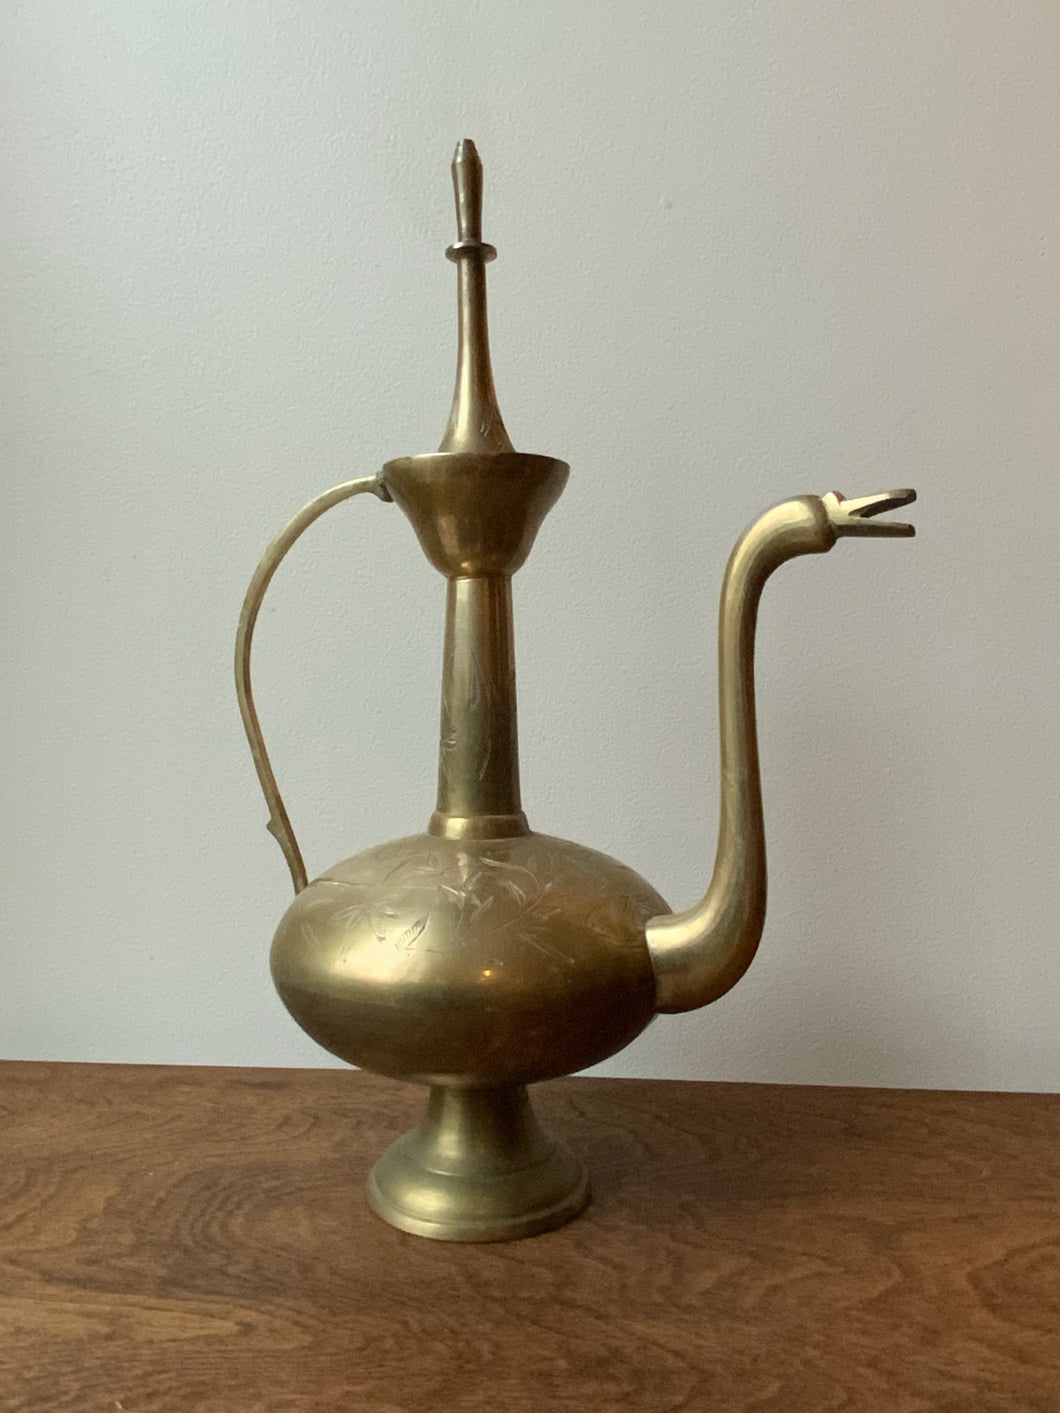 Magnificent Vintage Brass Turkish Coffee Pot Vessel with Goose Head Spout (WOW!)